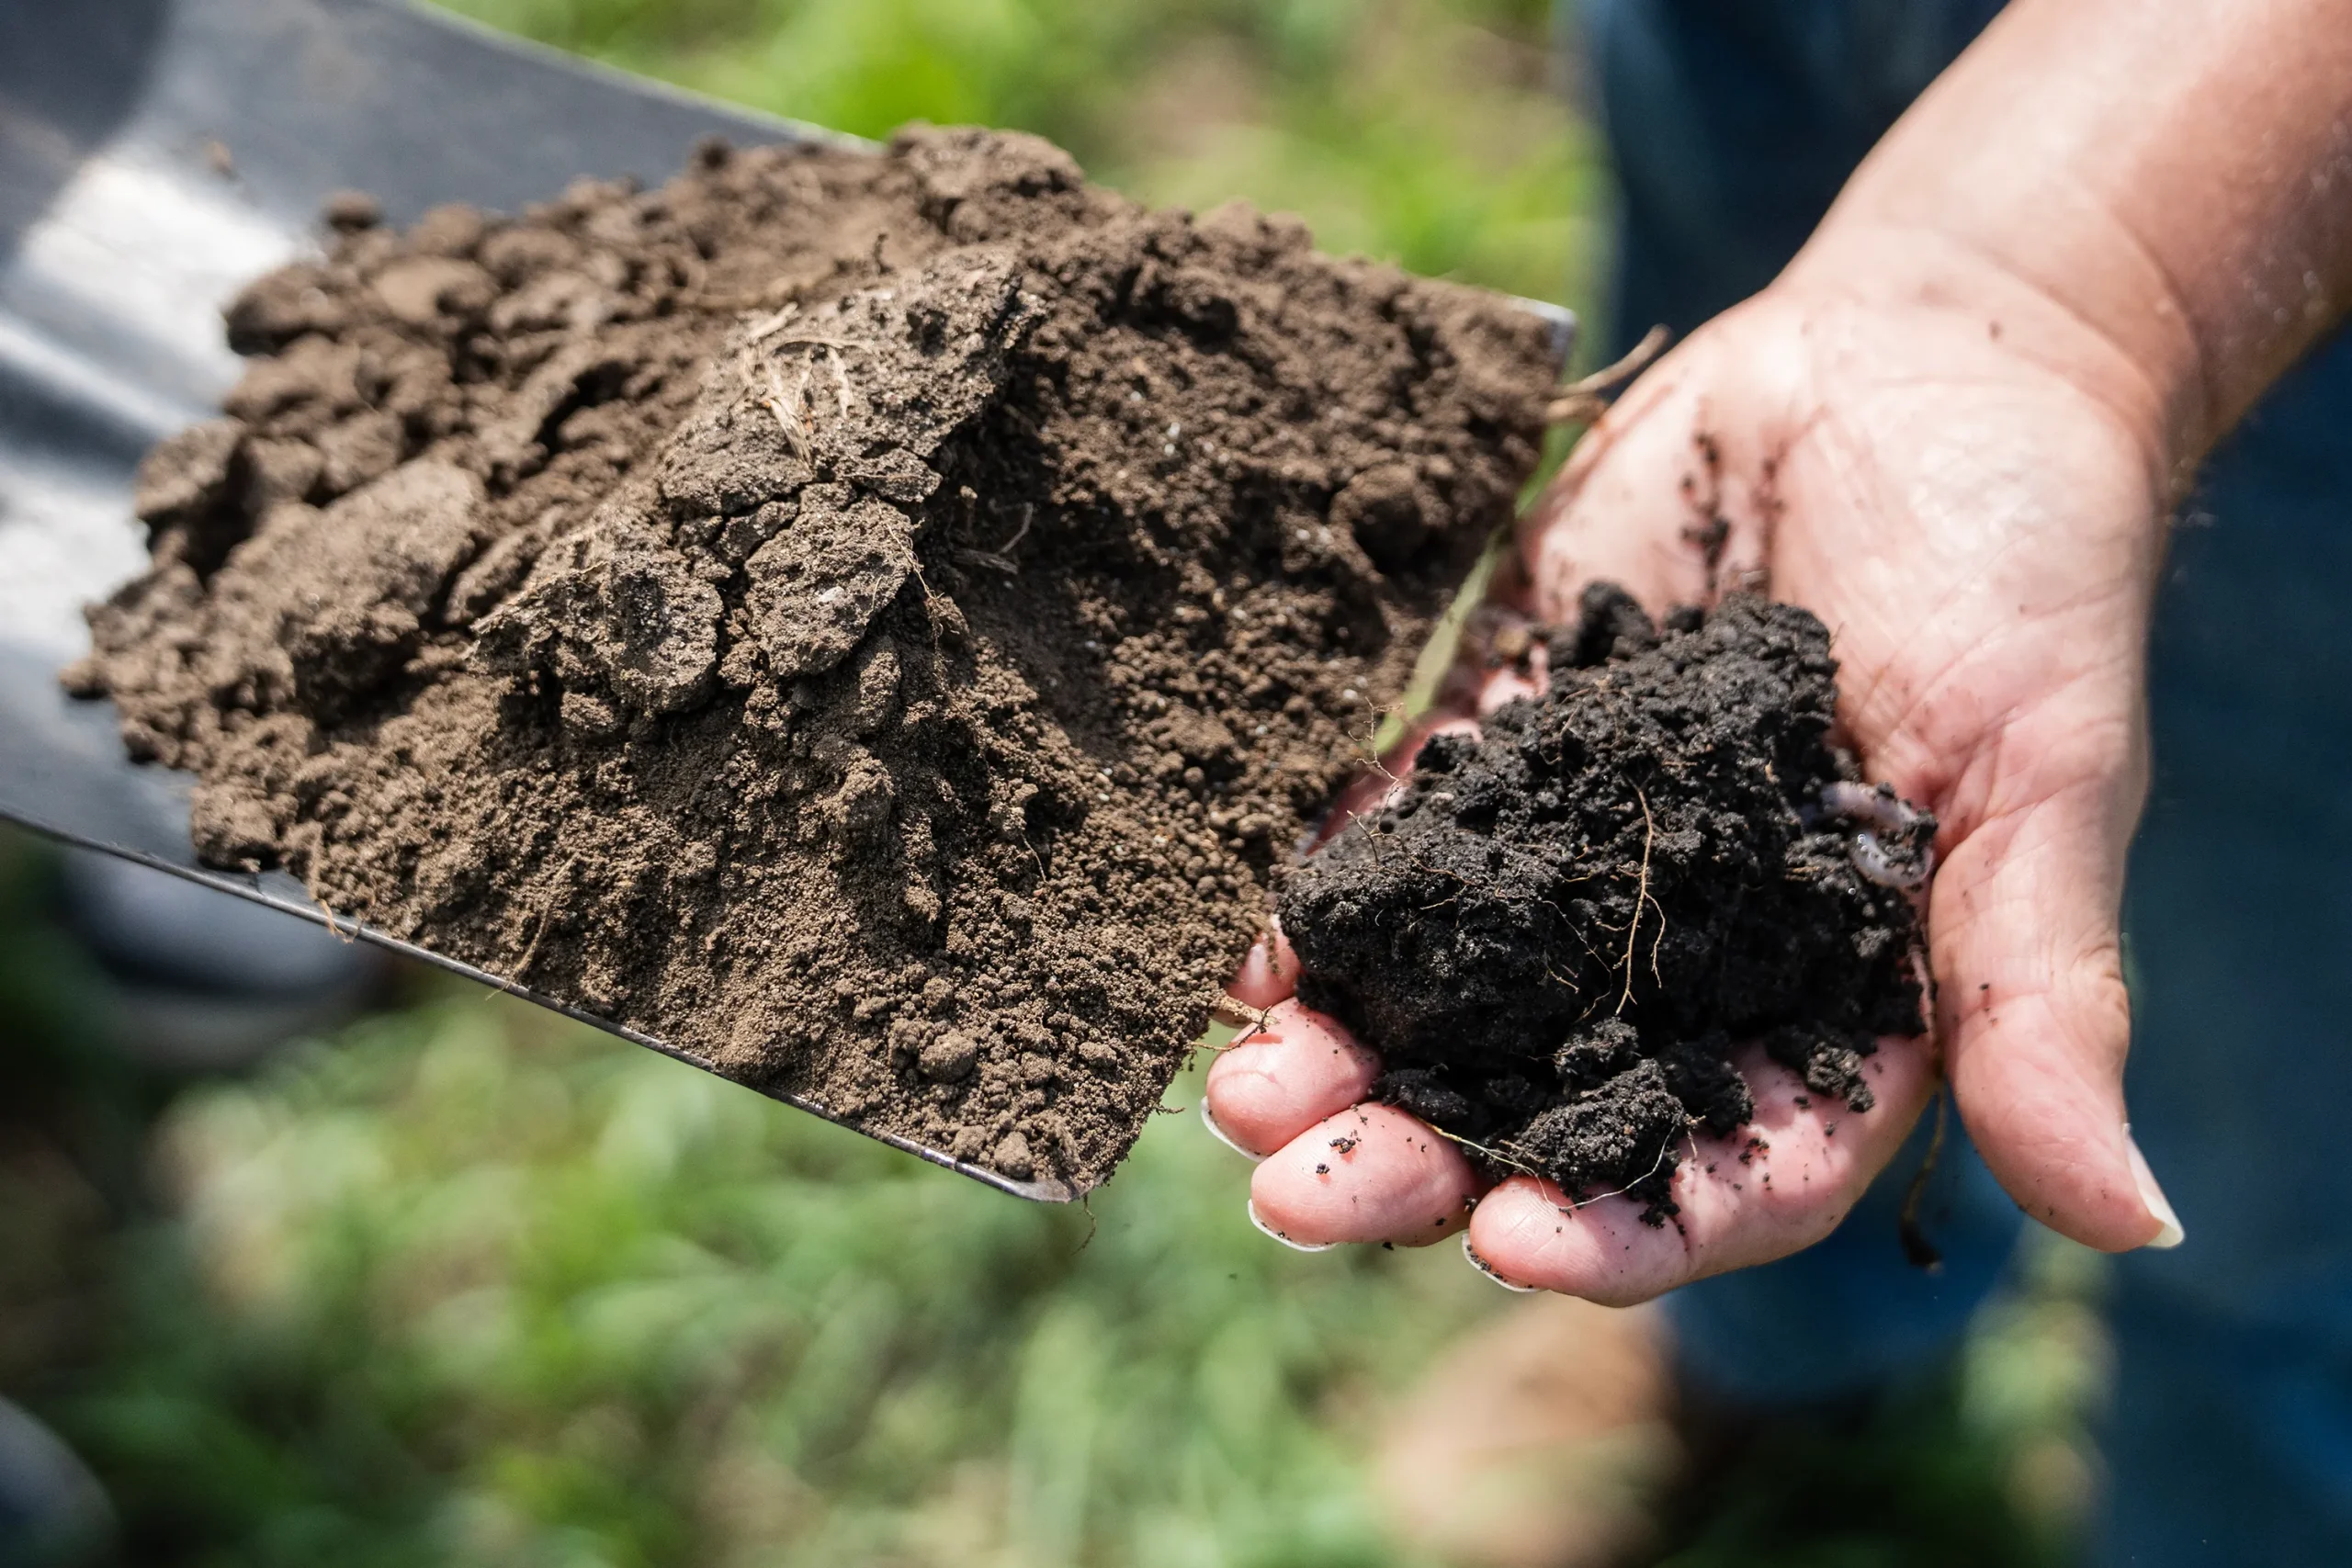 Iowa’s legendary soil, the bedrock of its economy, is losing its richness, new research shows